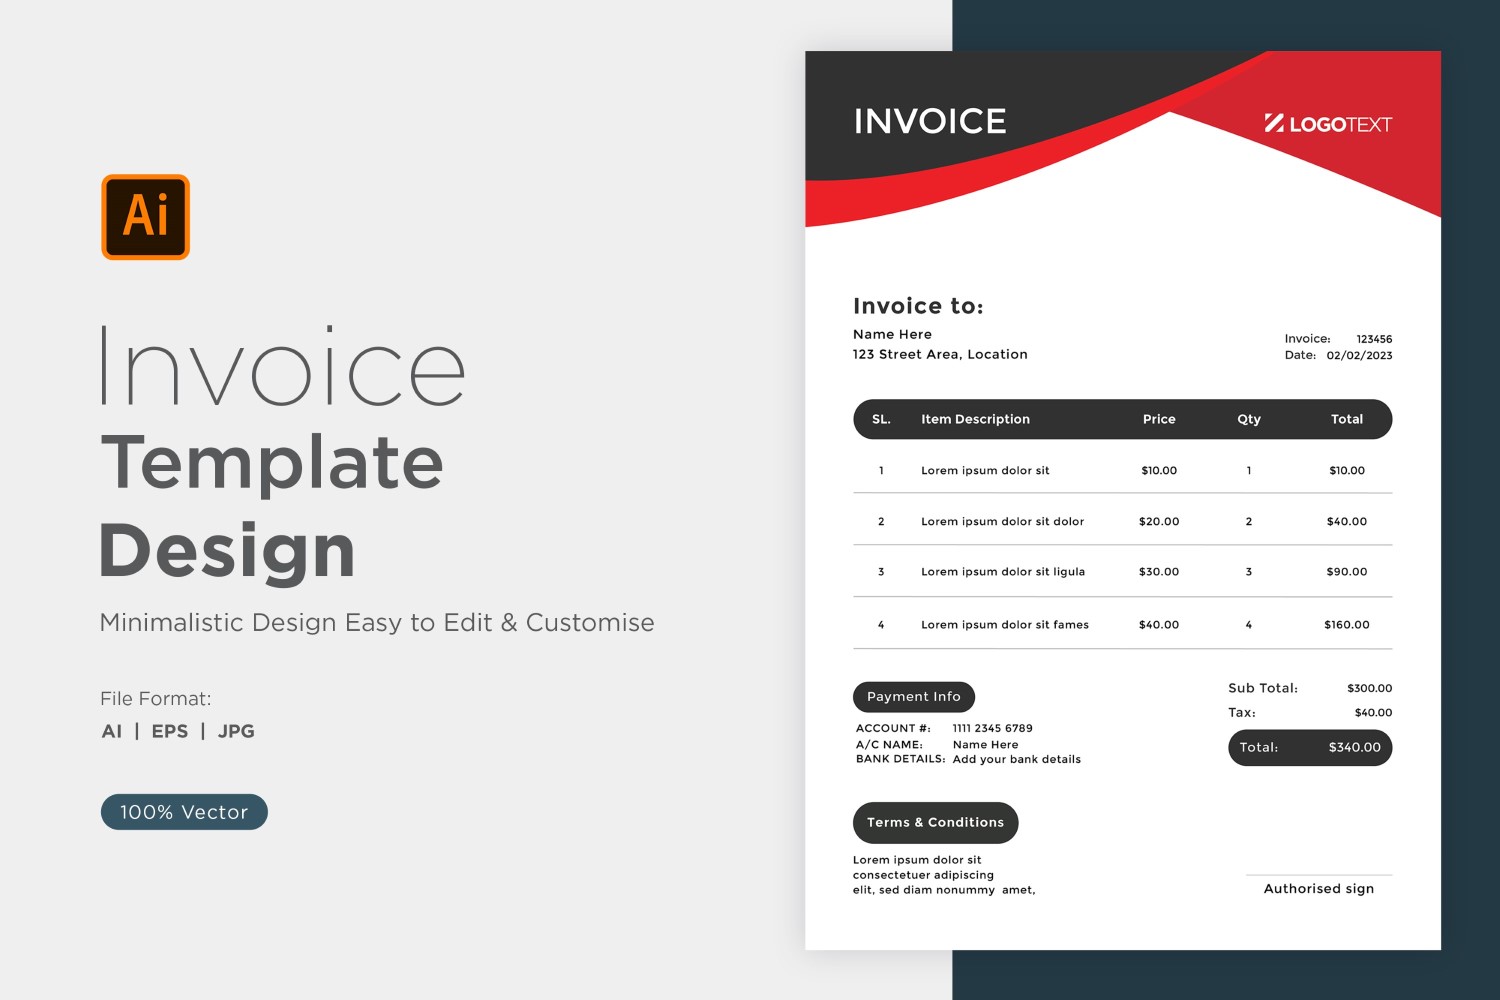 Corporate Invoice Design Template Bill form Business Payments Details Design Template 98